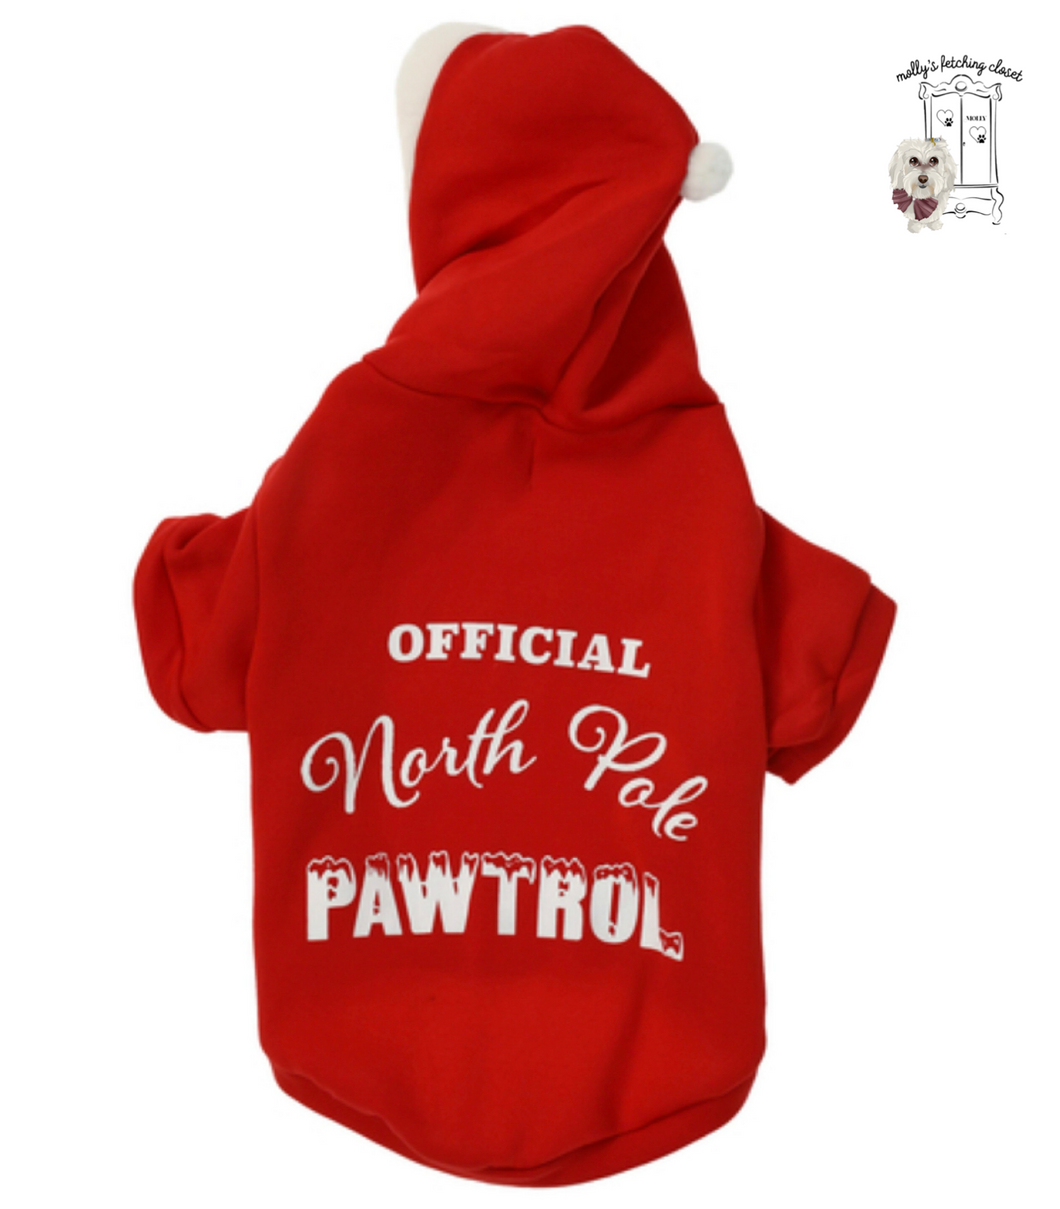 Official North Pole Pawtrol